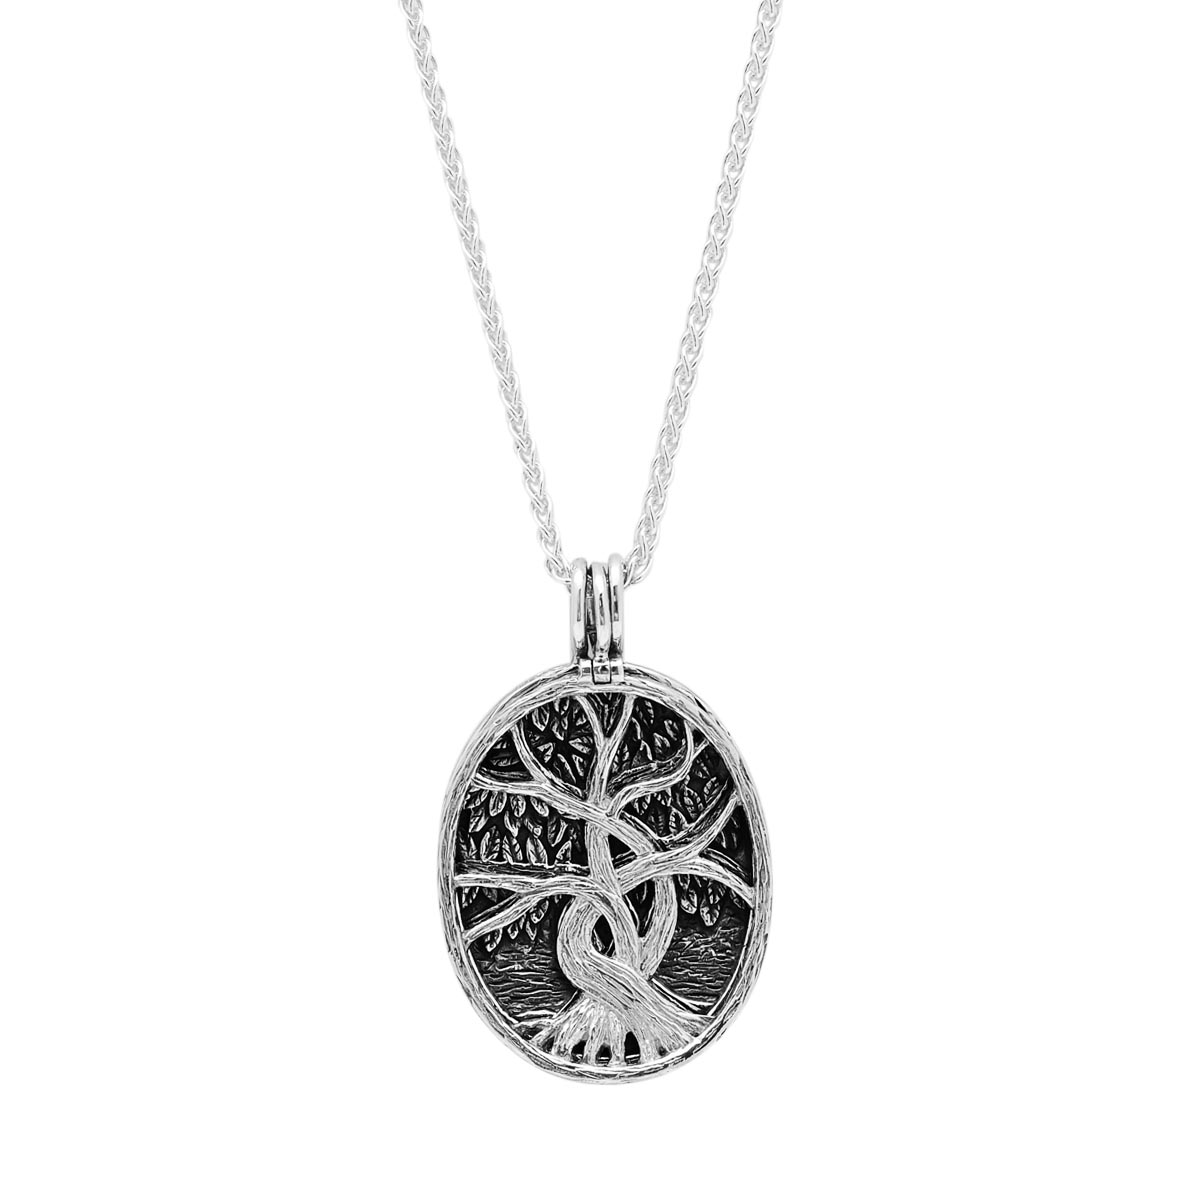 Keith Jack Four Way Reversible Tree of Life Necklace in Sterling Silver and 22kt Yellow Gold